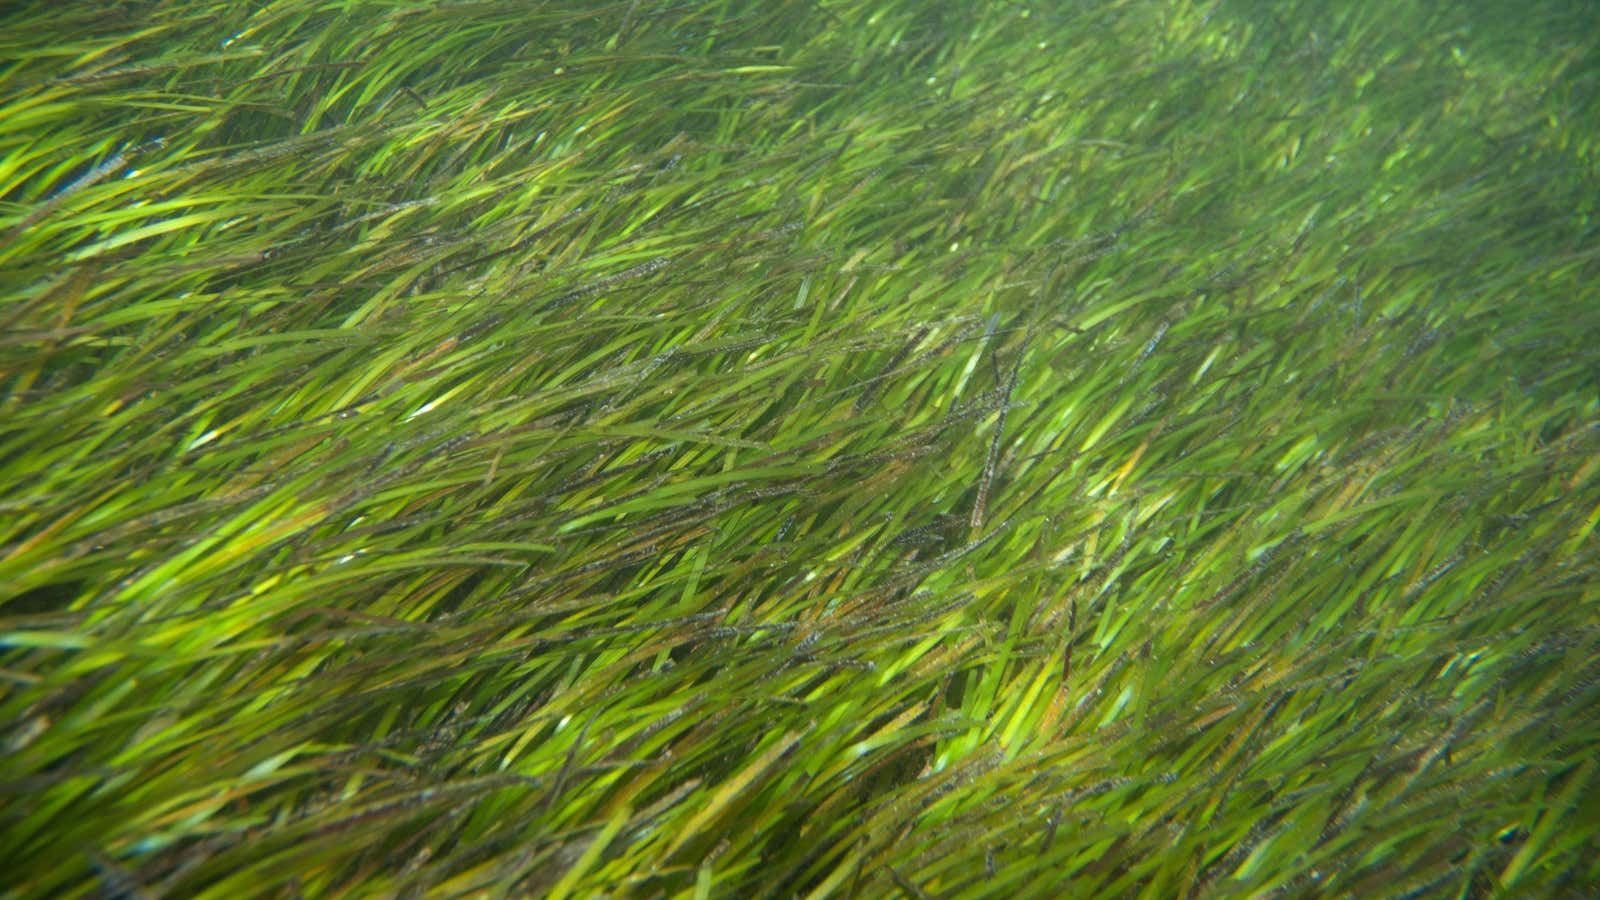 Overfishing and coastal pollution have taken a toll on seagrasses, depleting them at an alarming rate.